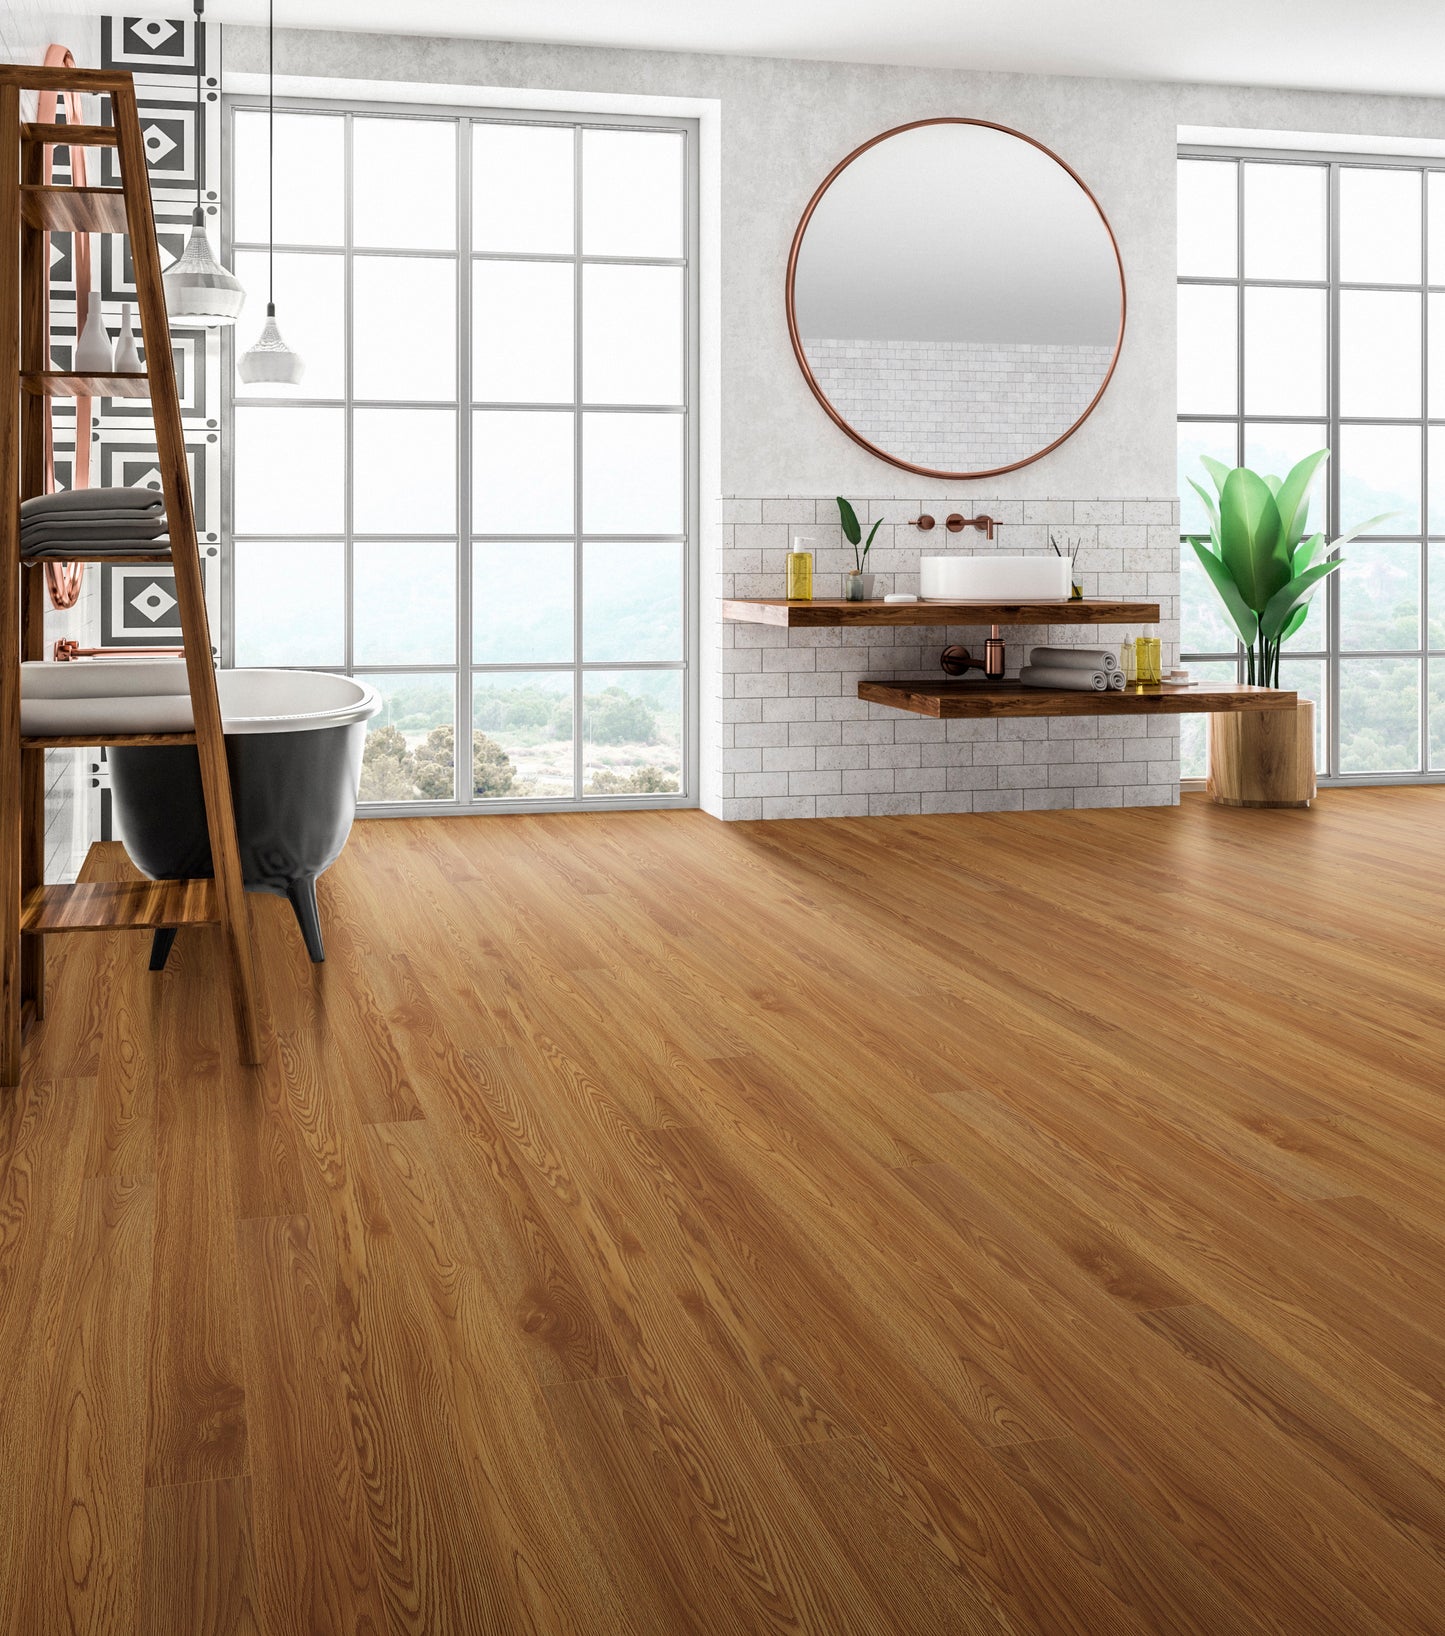 SUPERCore Xtreme Traditions Country Oak Sample